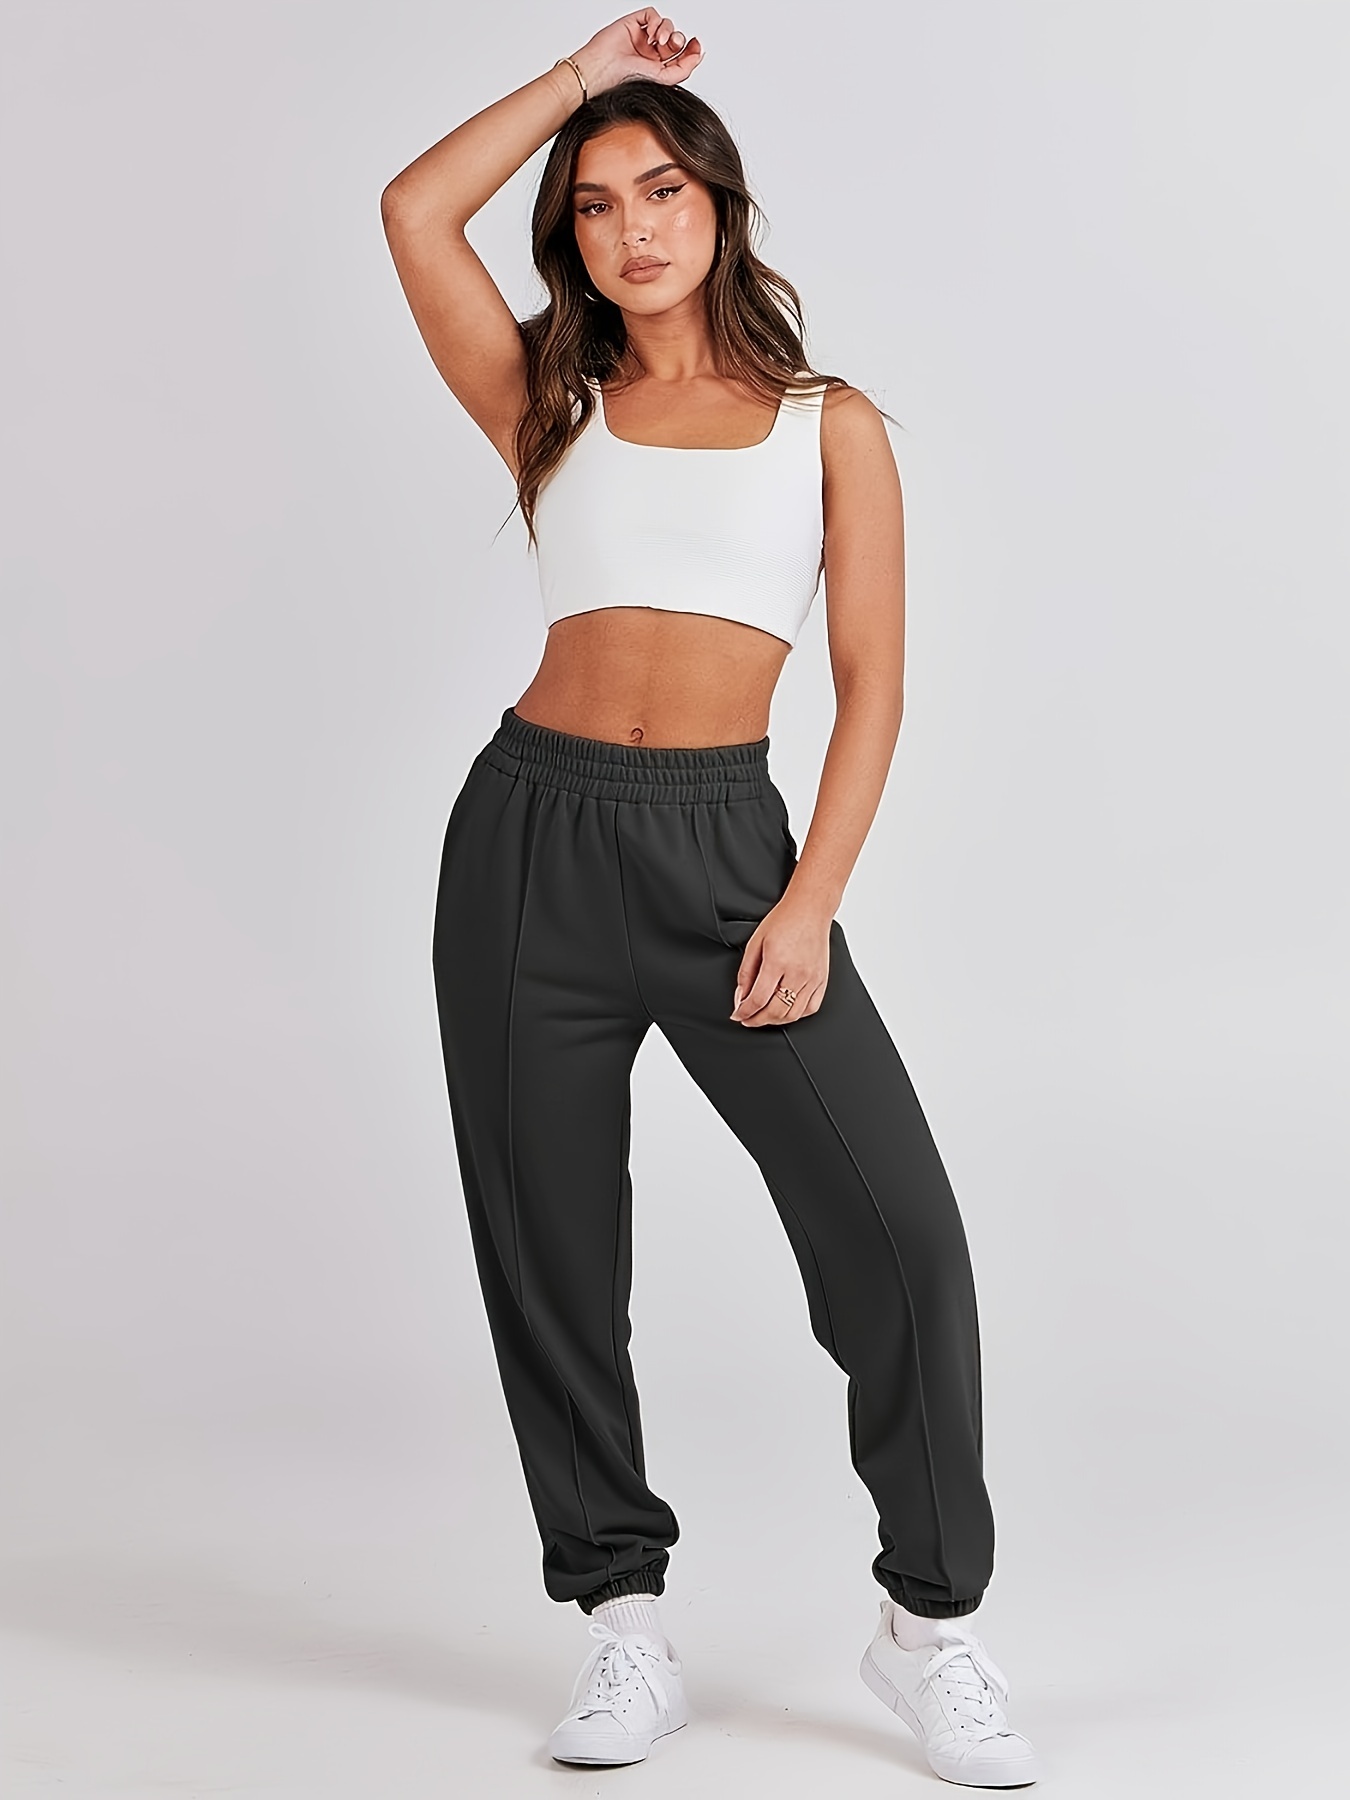 Best Deal for Workout Pants for Women high Waisted Bottom Joggers with